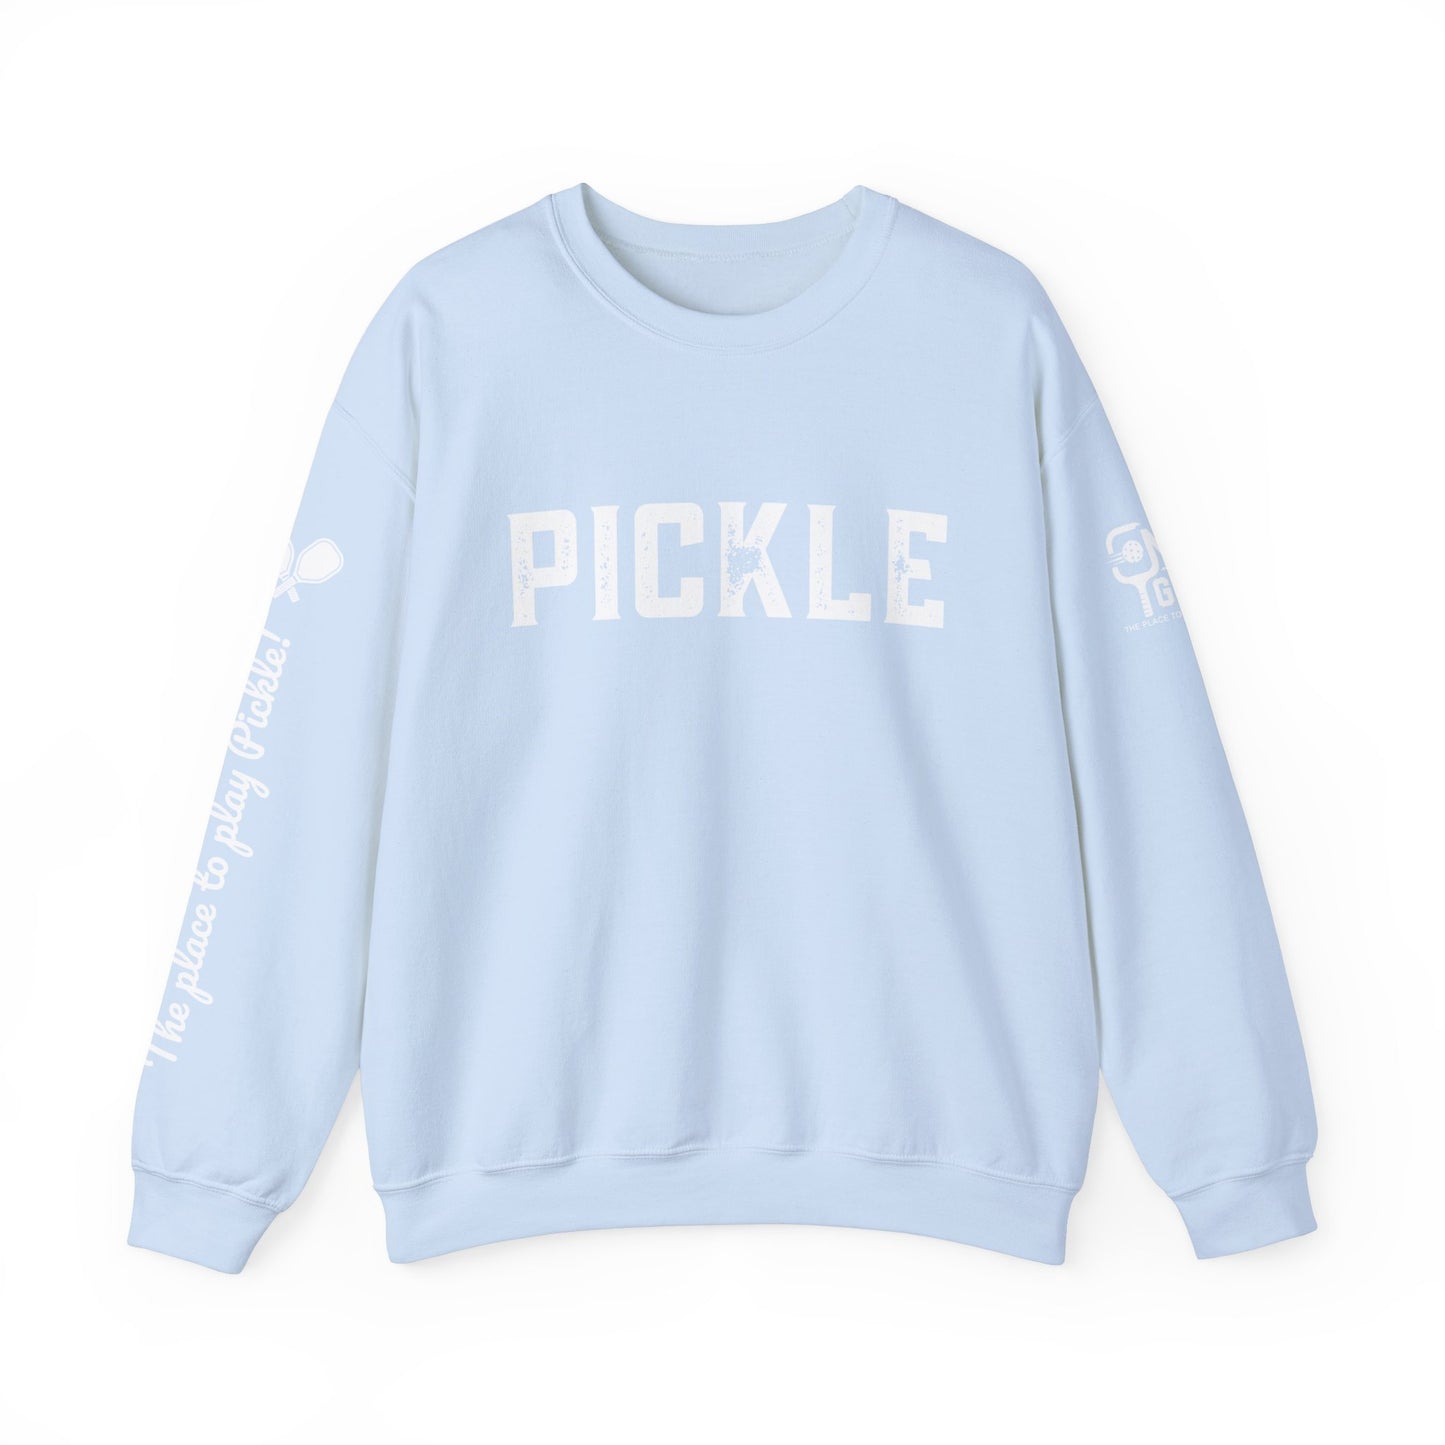 Net Game PICKLE Distressed Crew- add name under paddle, free